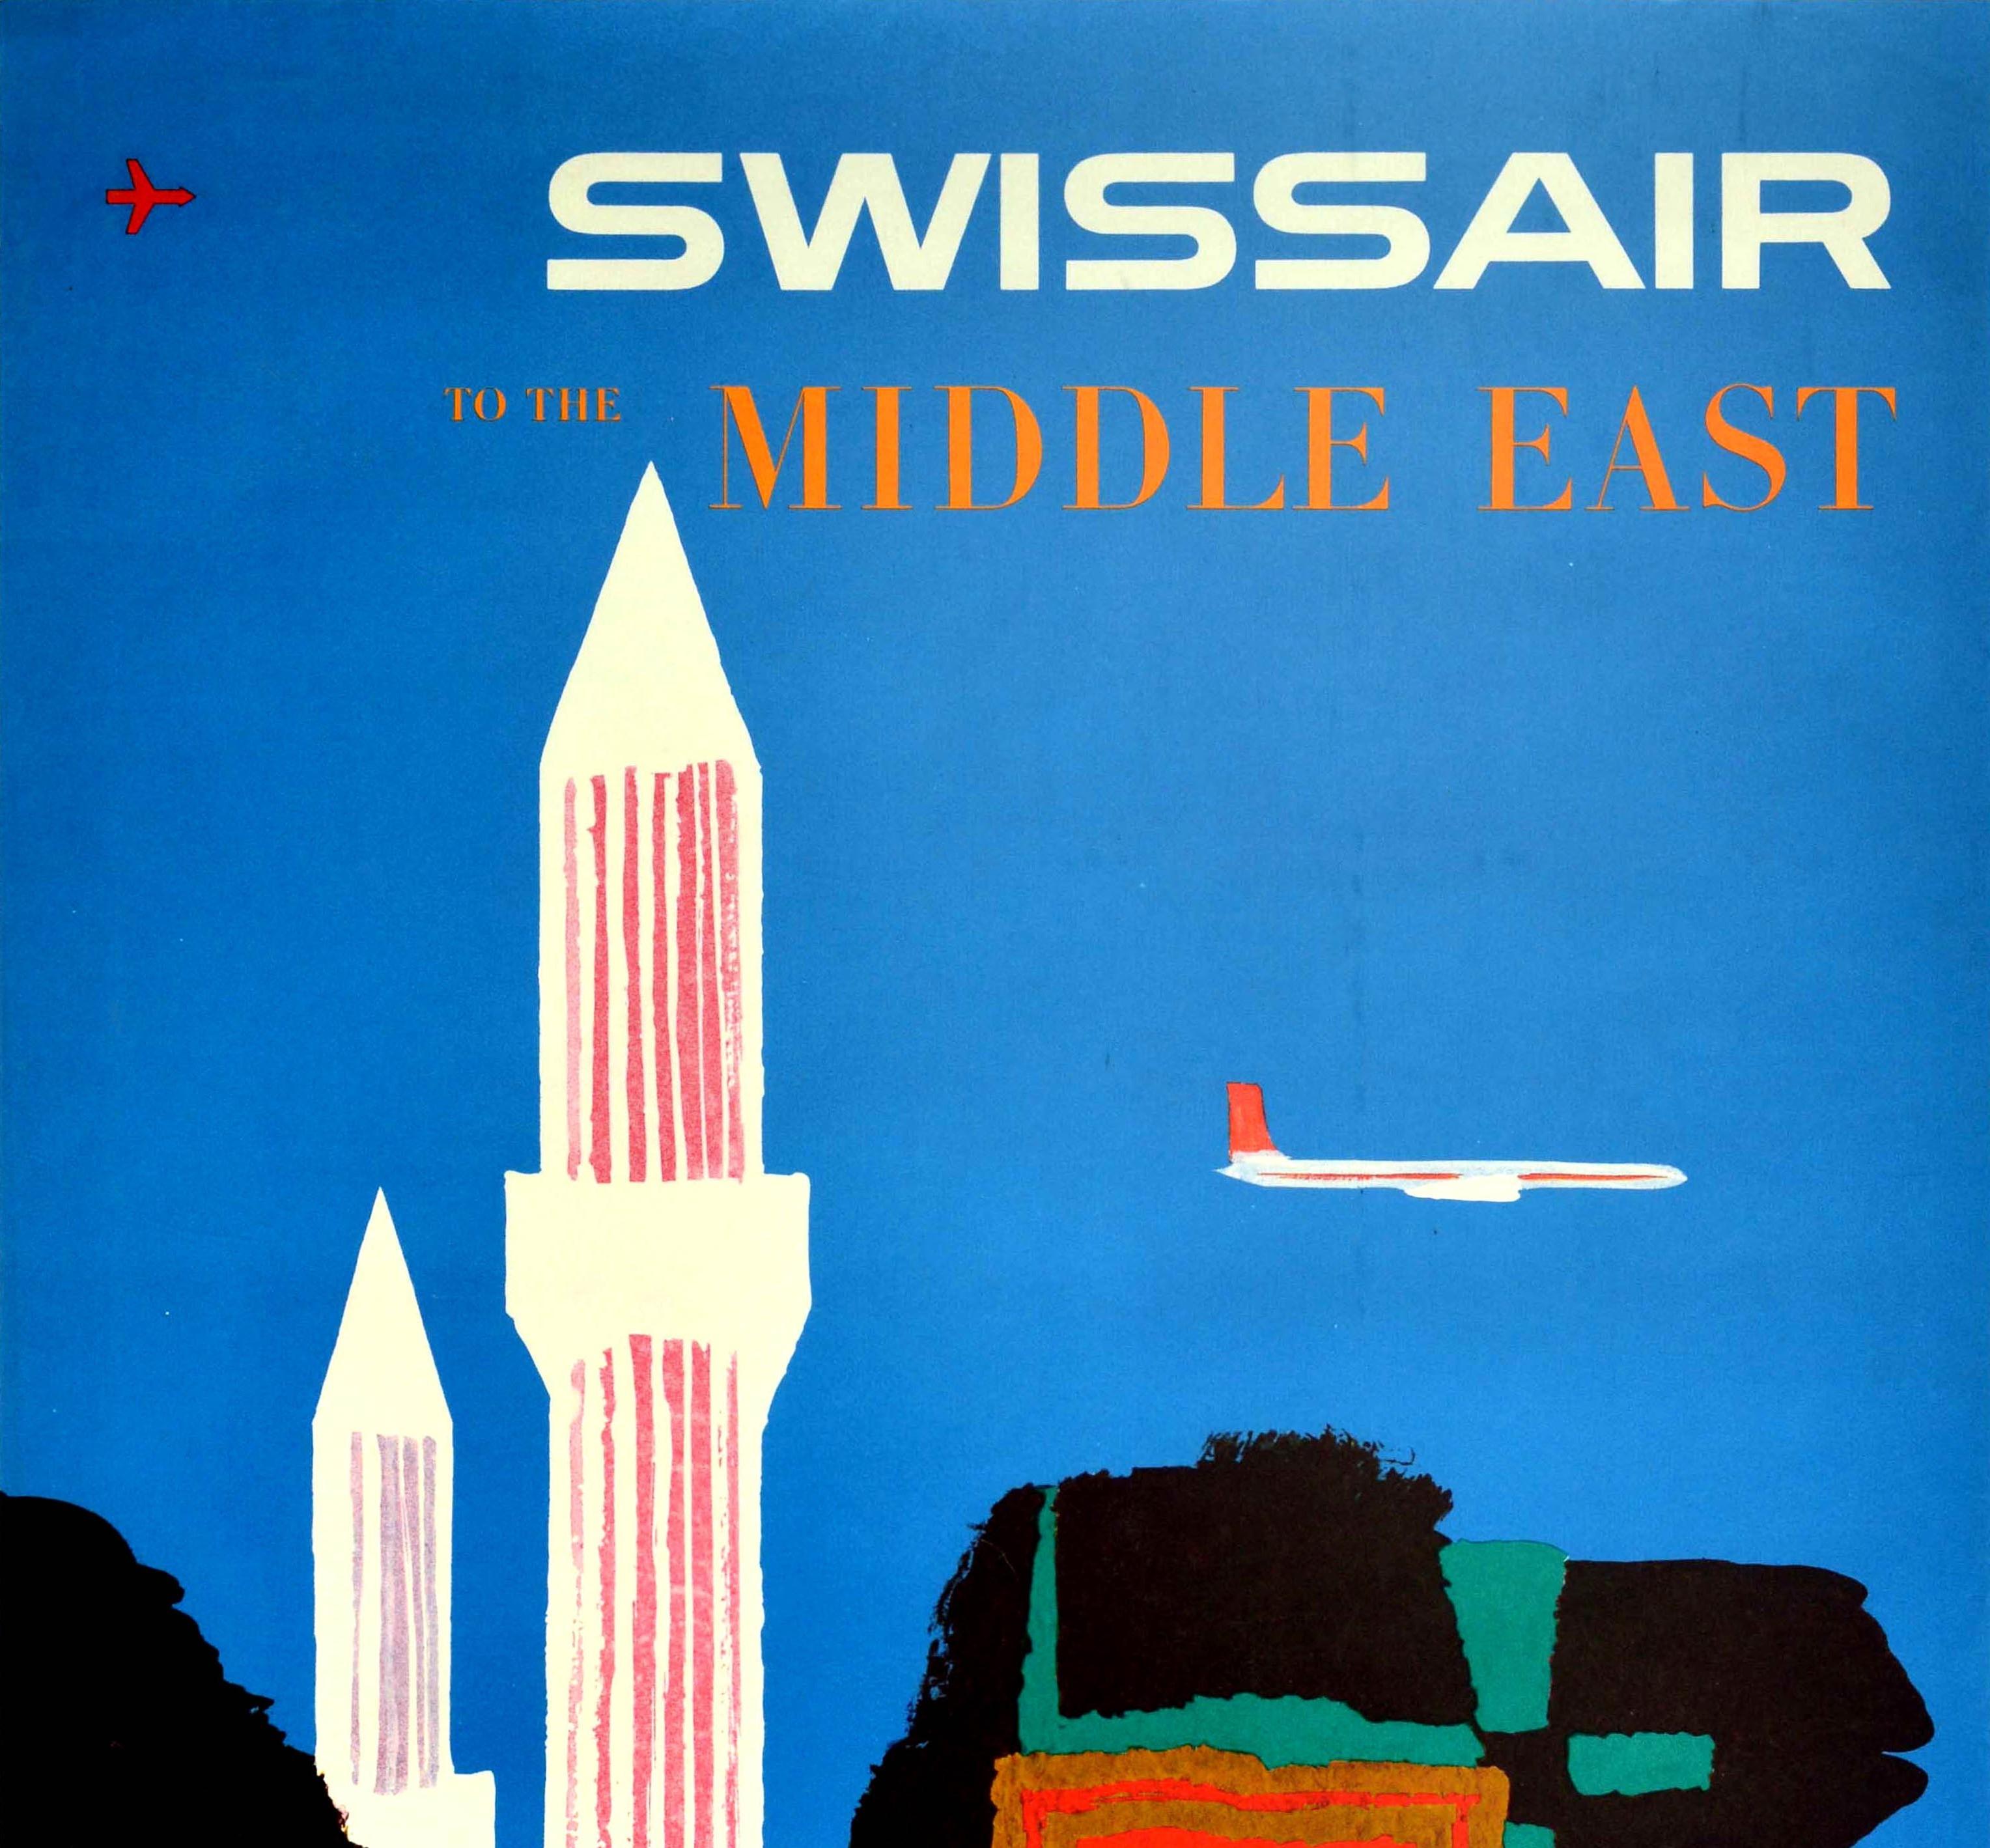 Original vintage aviation advertising poster issued by Swissair To The Middle East featuring a stylised white and red plane flying over mosque towers and a black camel wearing a decorative star and tassels set against a blue background. Design by